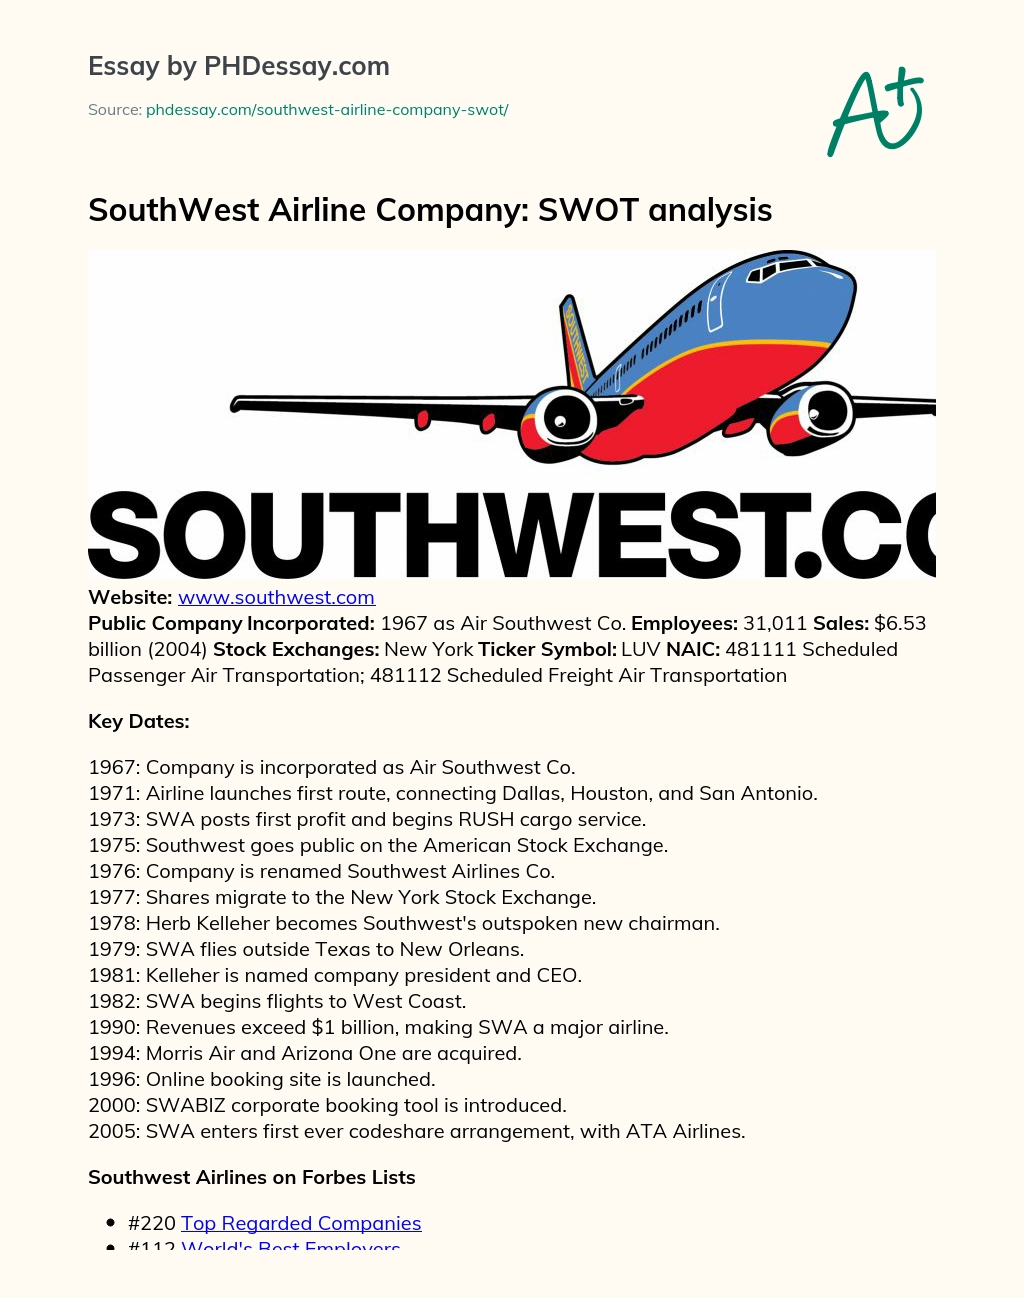 SouthWest Airline Company: SWOT Analysis essay